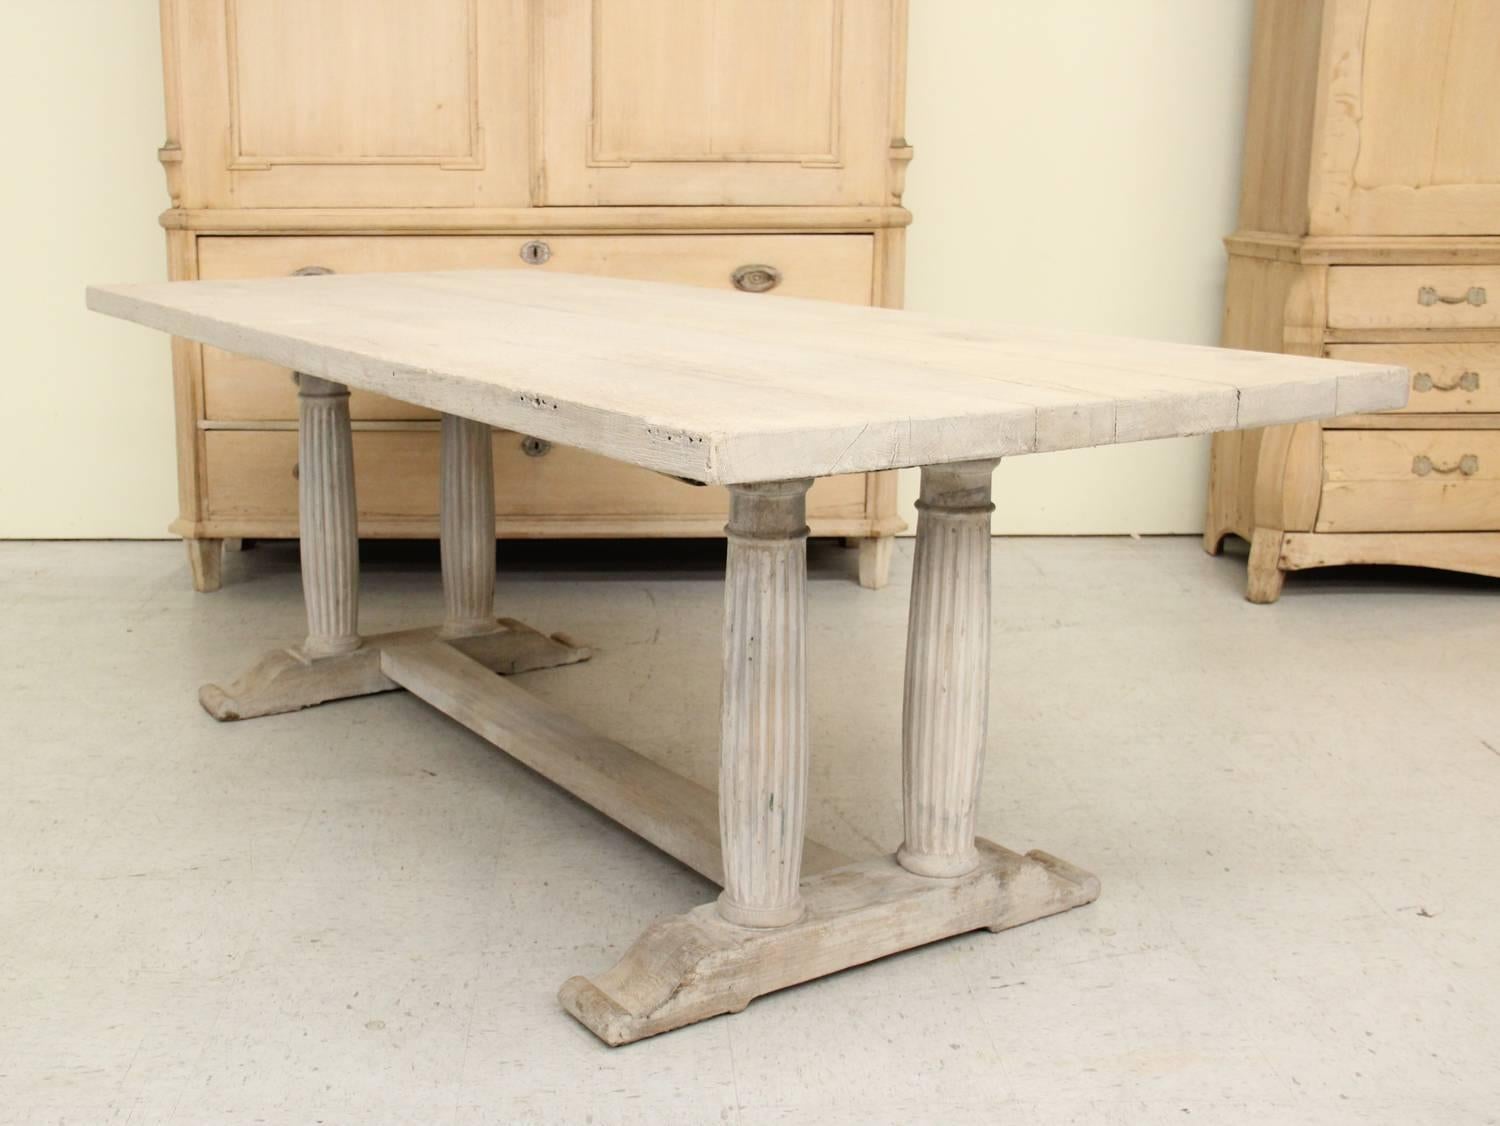 A French oak dining table from the 19th century with an aged white painted patina. This beautiful table has a plank top; reeded, gun barrel legs; and a sled base with stretcher.